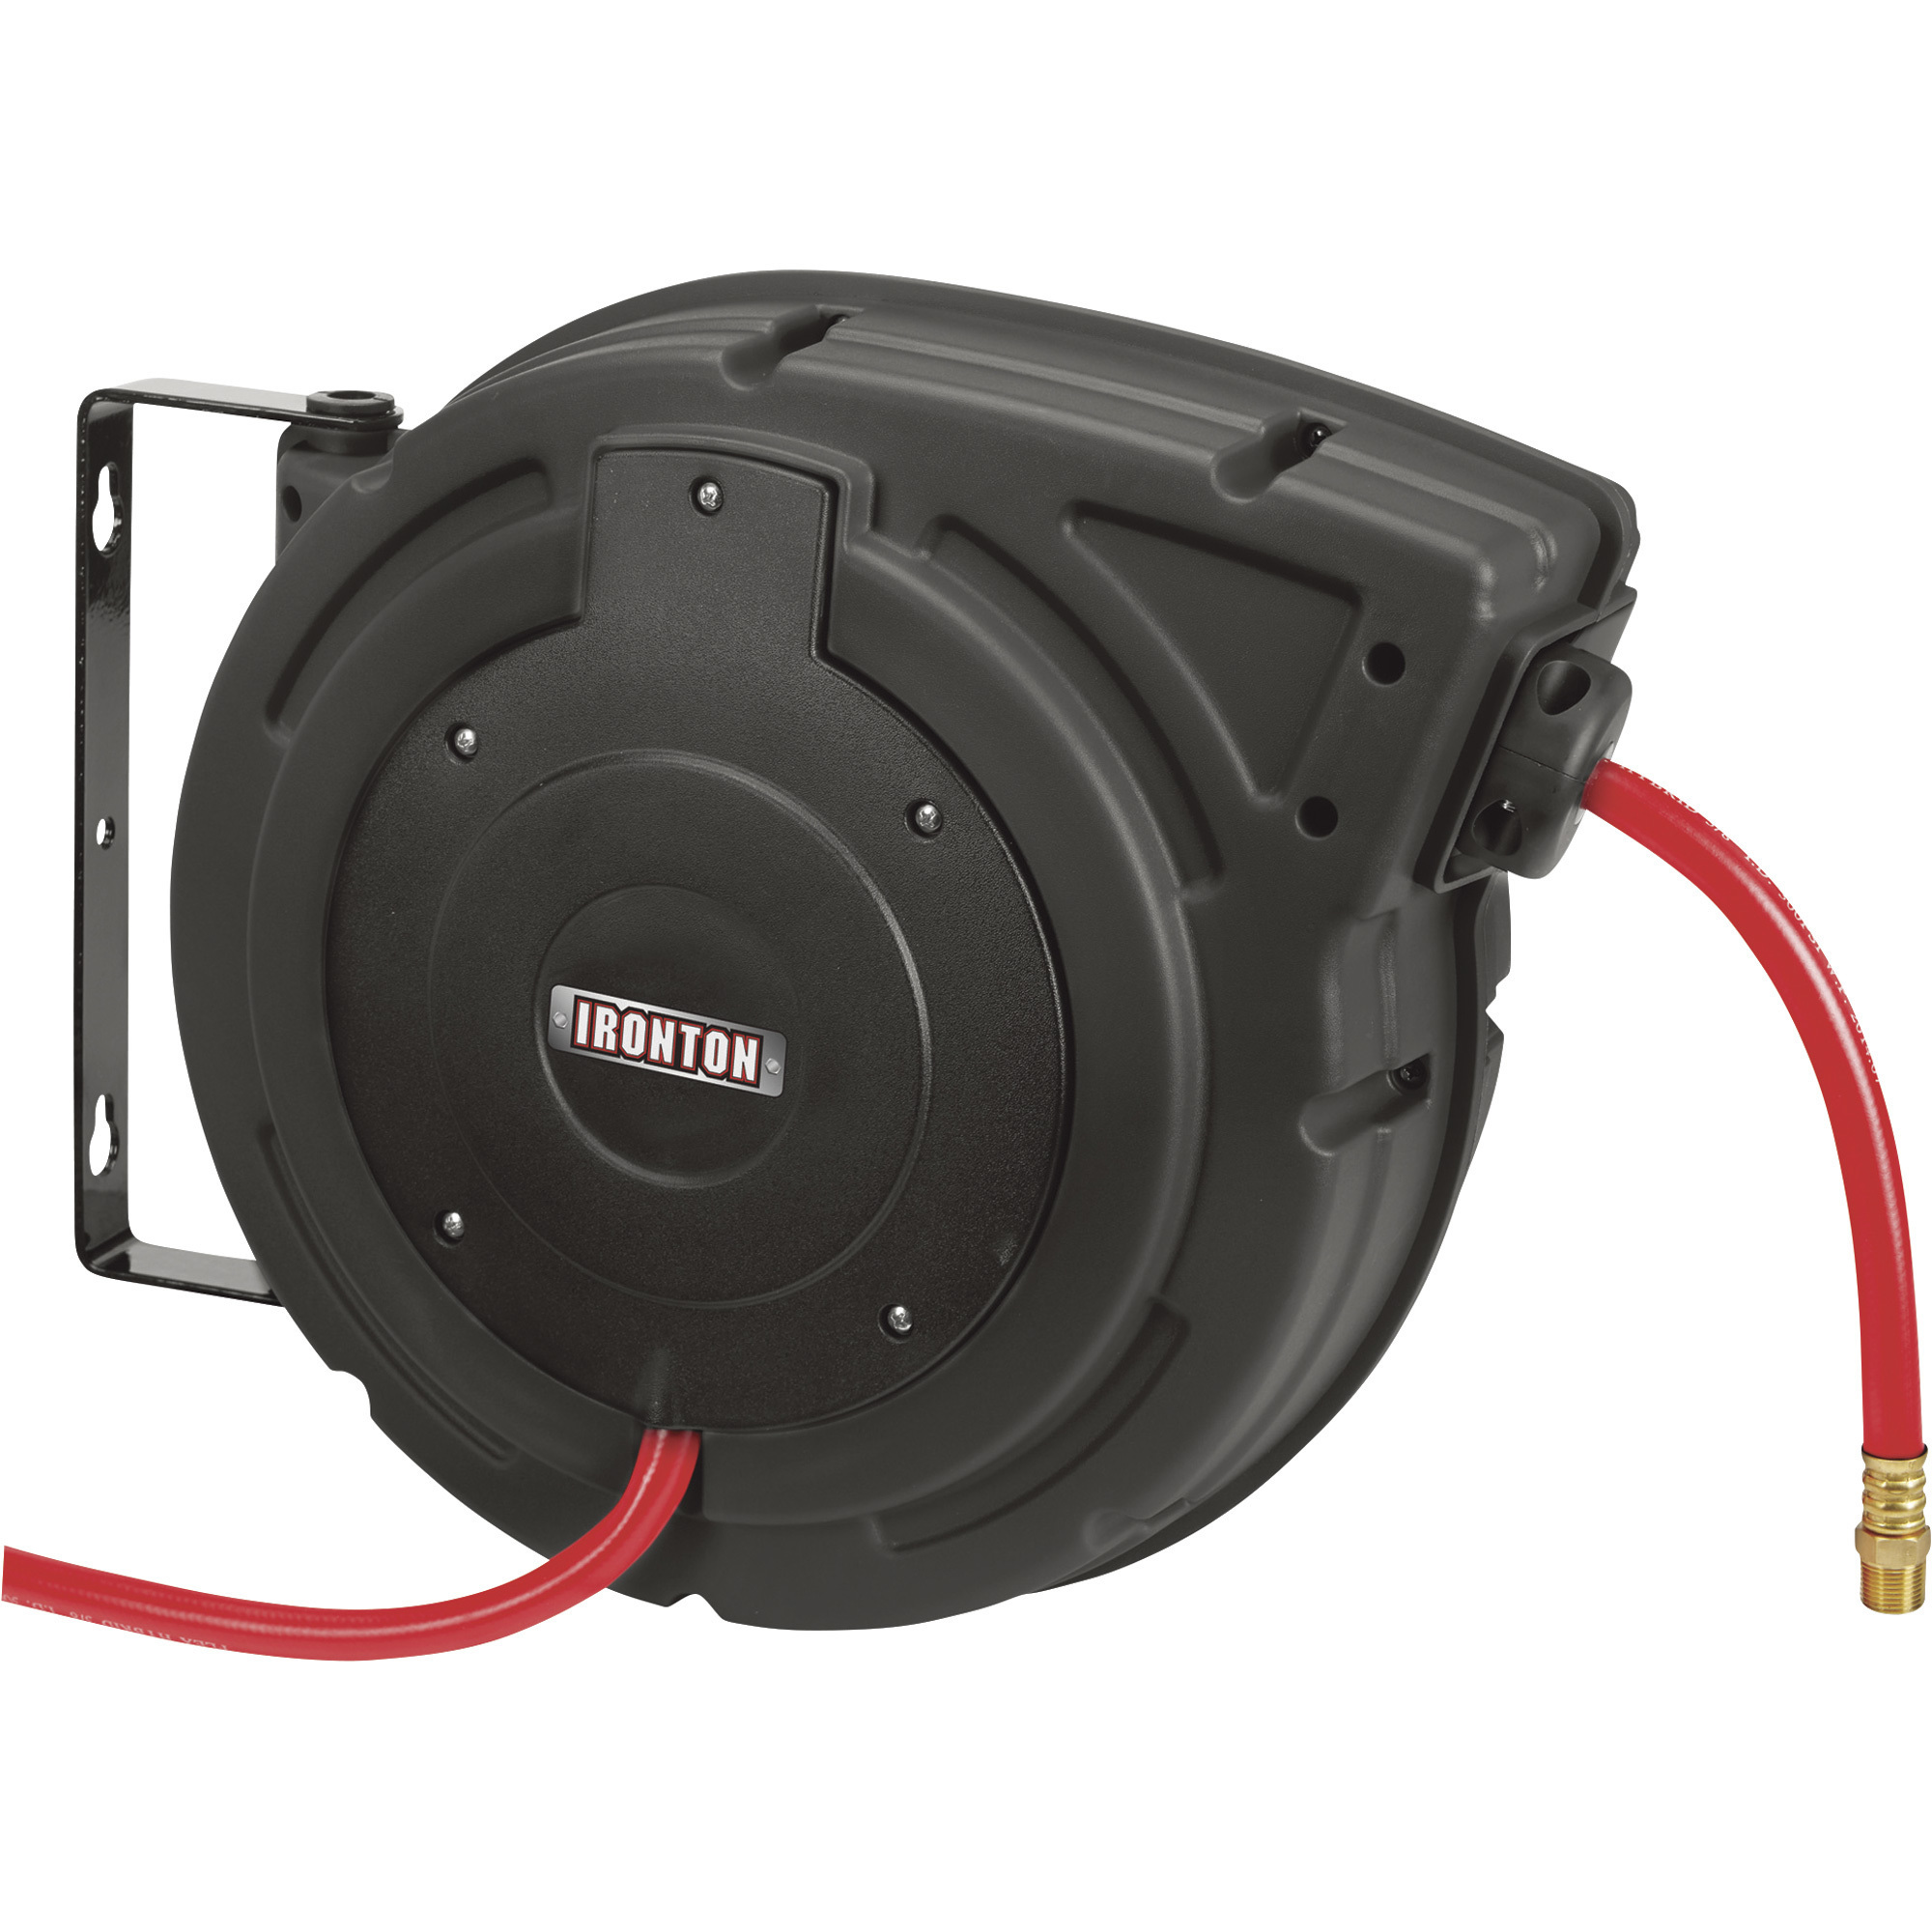 Ironton Compact Air Hose Reel, With 3/8in. x 50ft. Hybrid Polymer